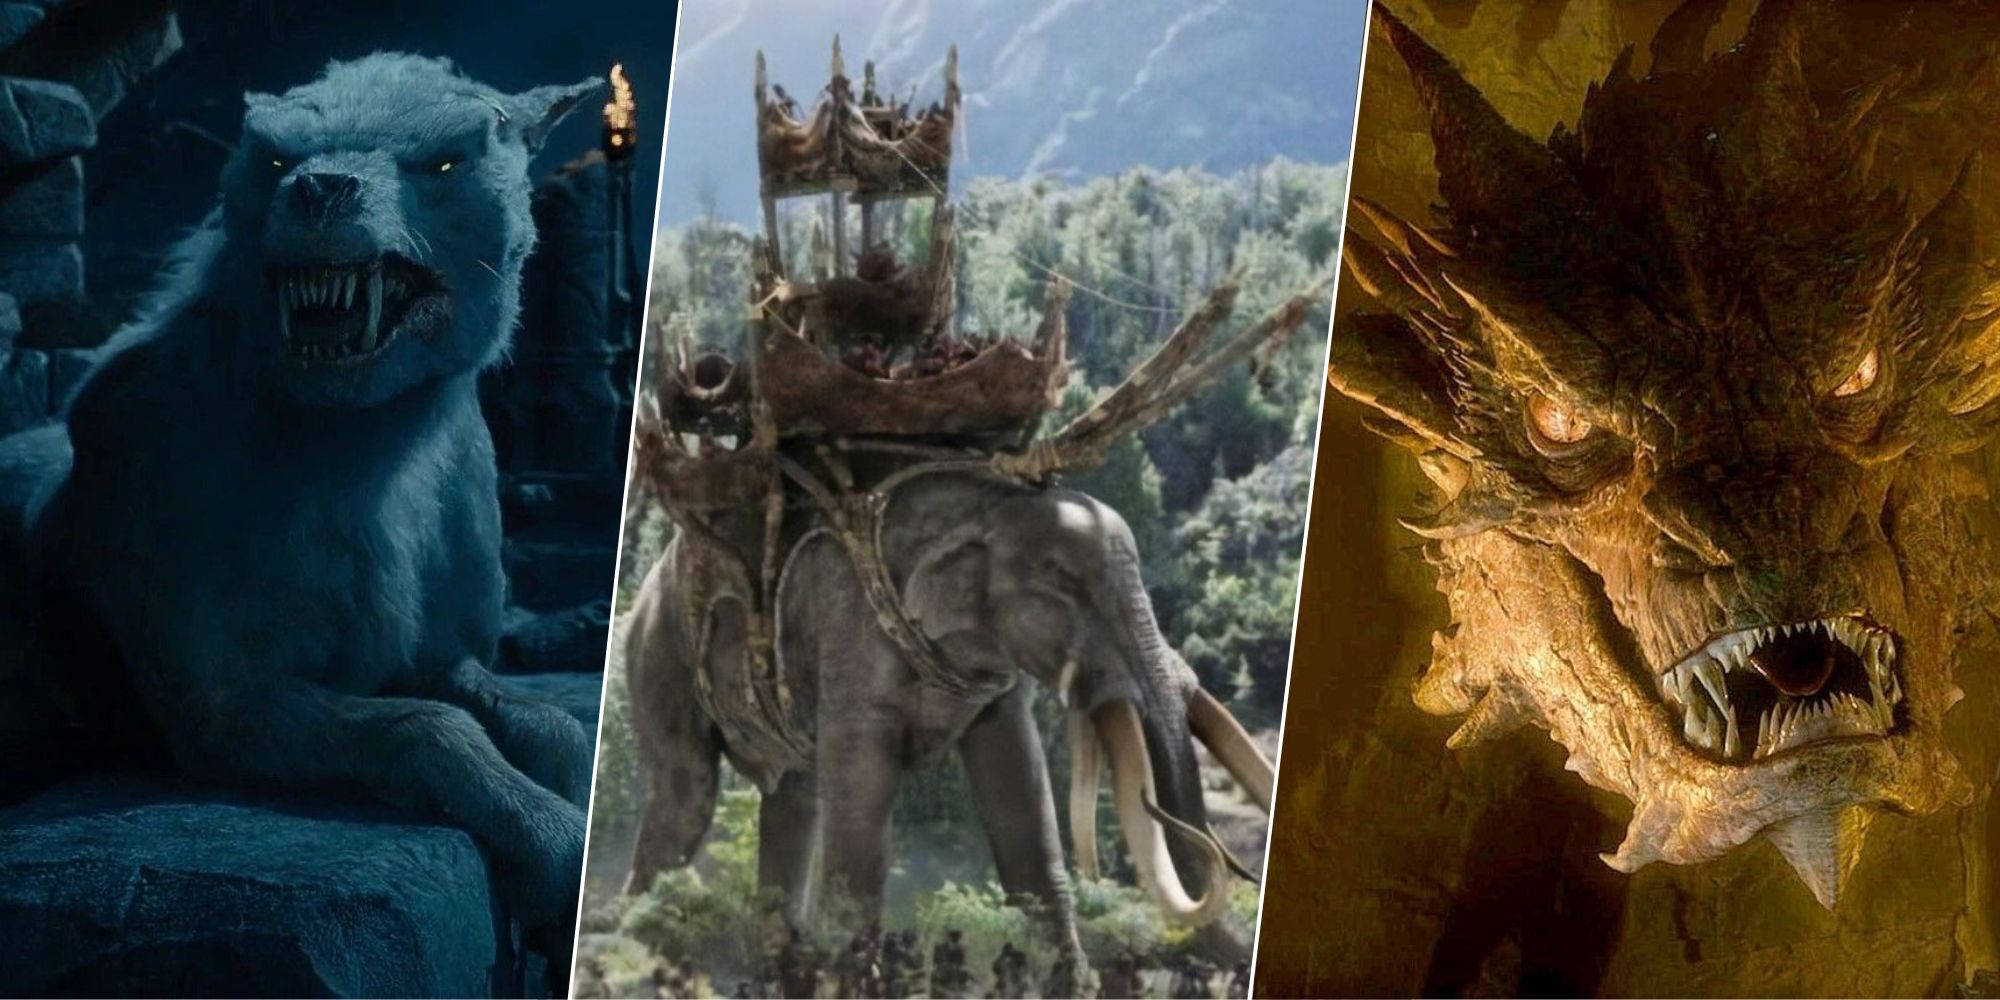 #39 Lord of the Rings #39 : The 10 Most Powerful Creatures in Middle earth